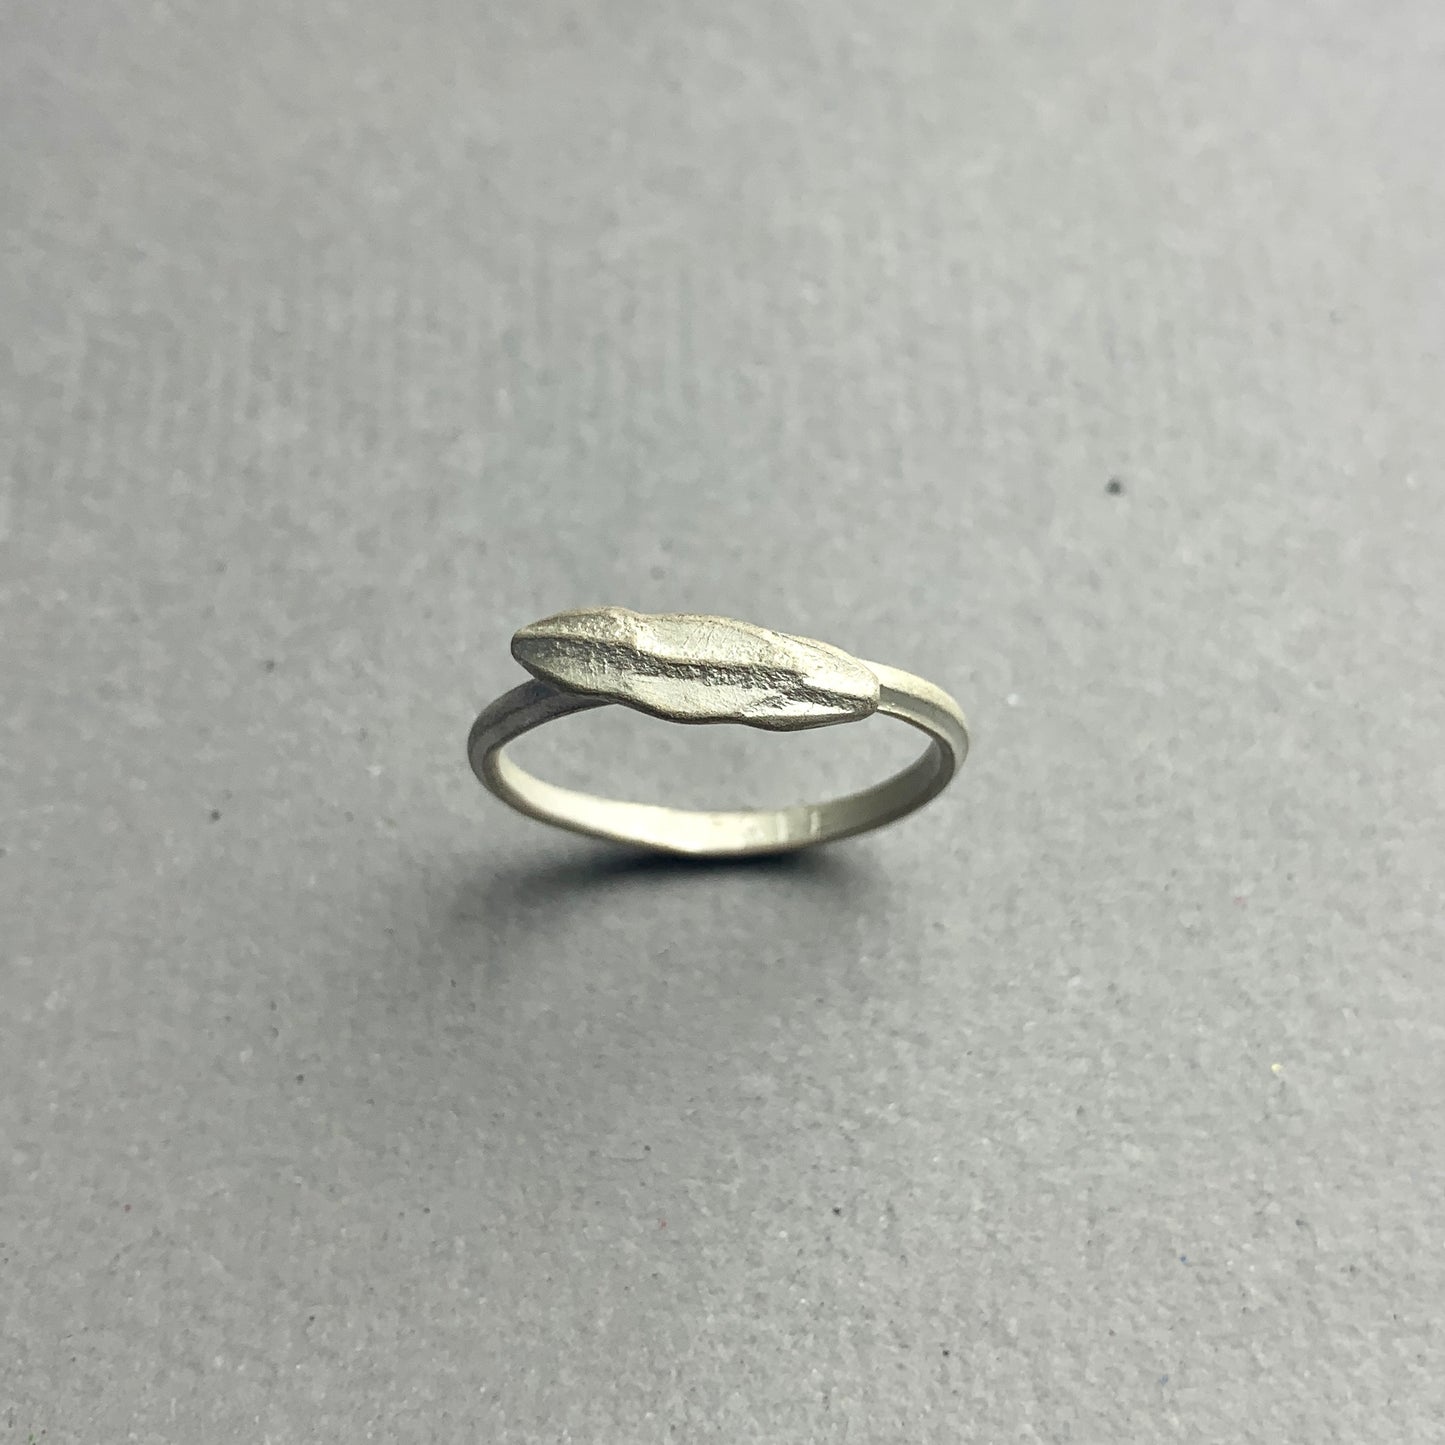 Journal Ring-Leaf No.3-Silver